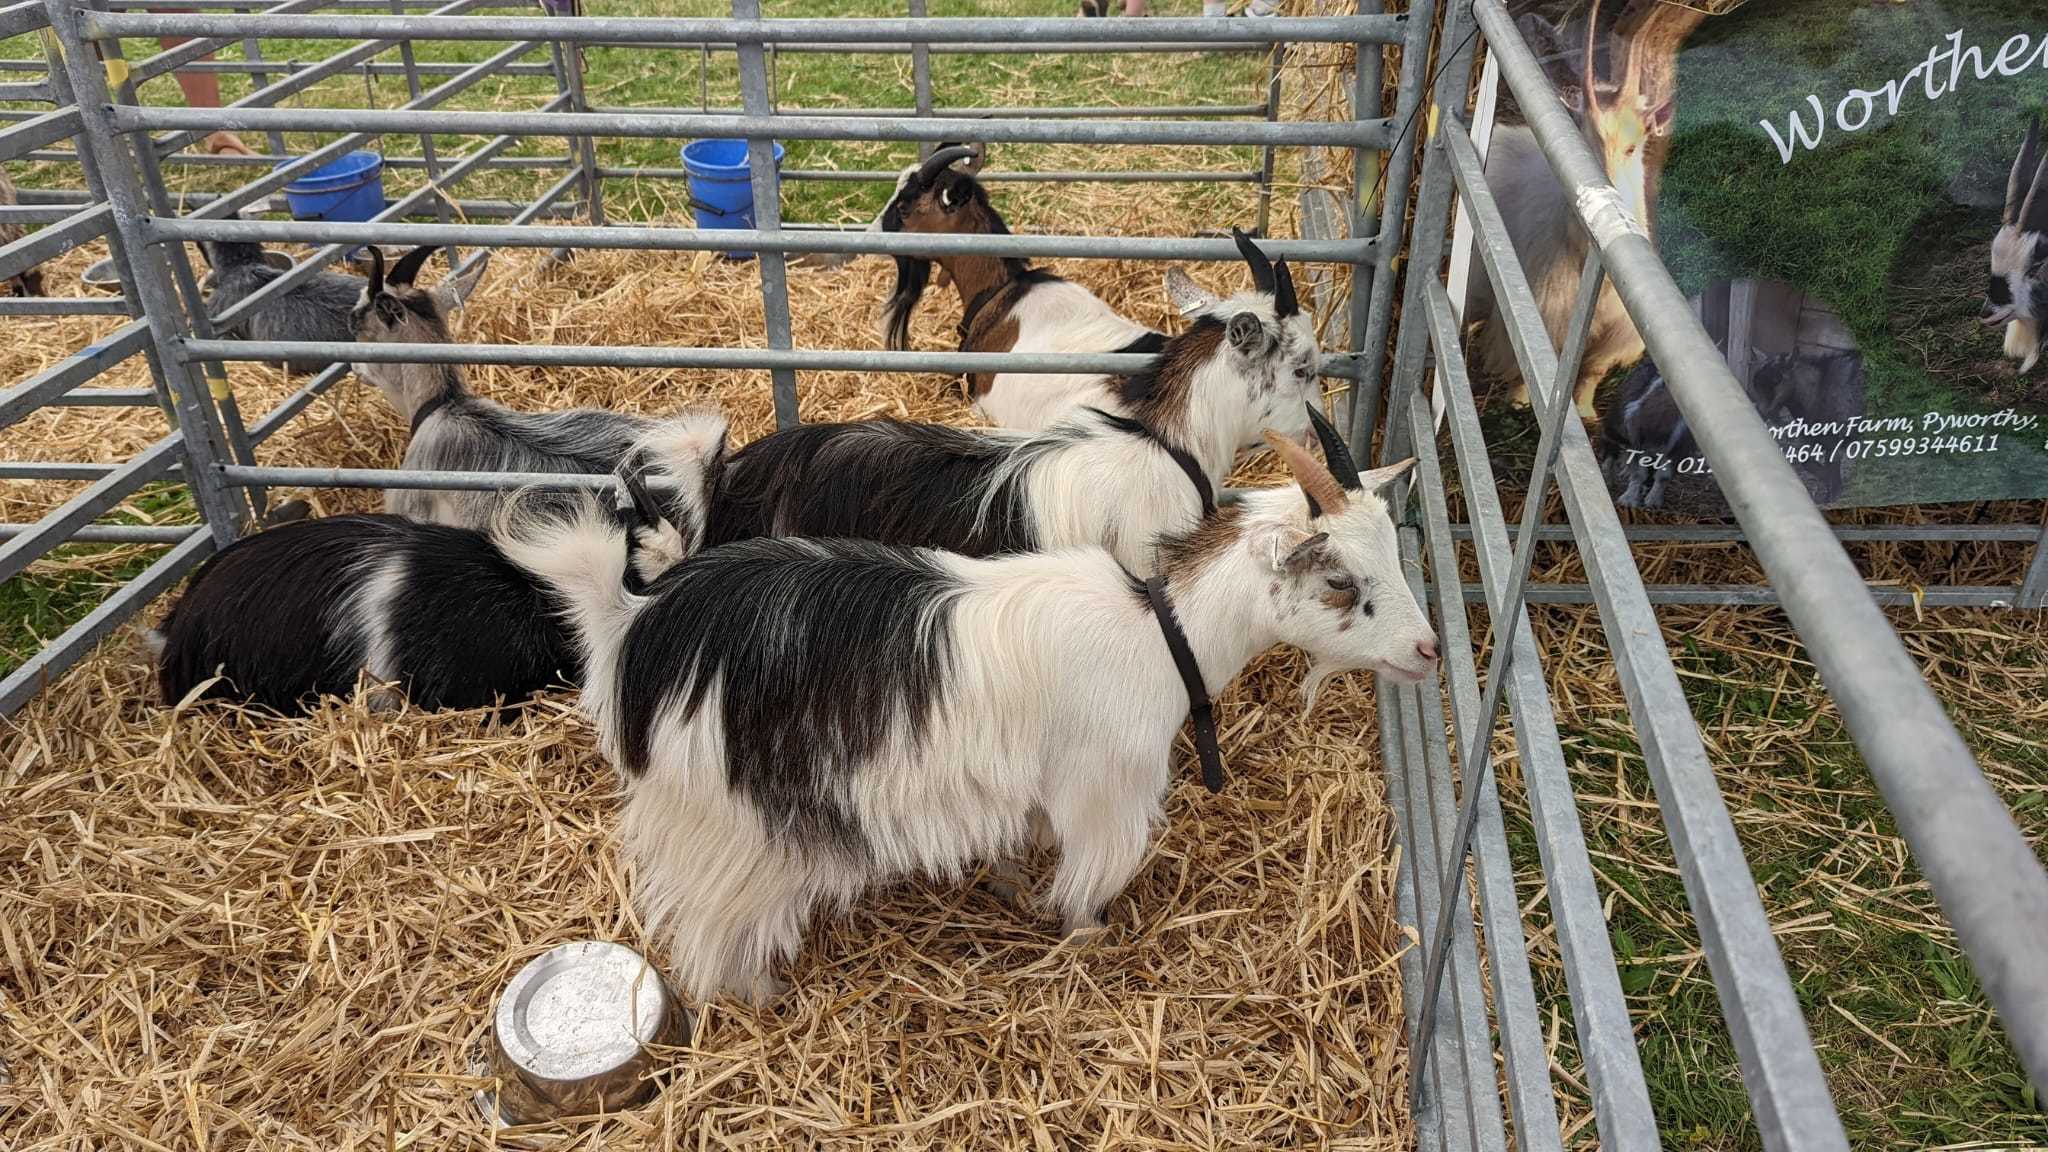 Some of the goats on display at the show